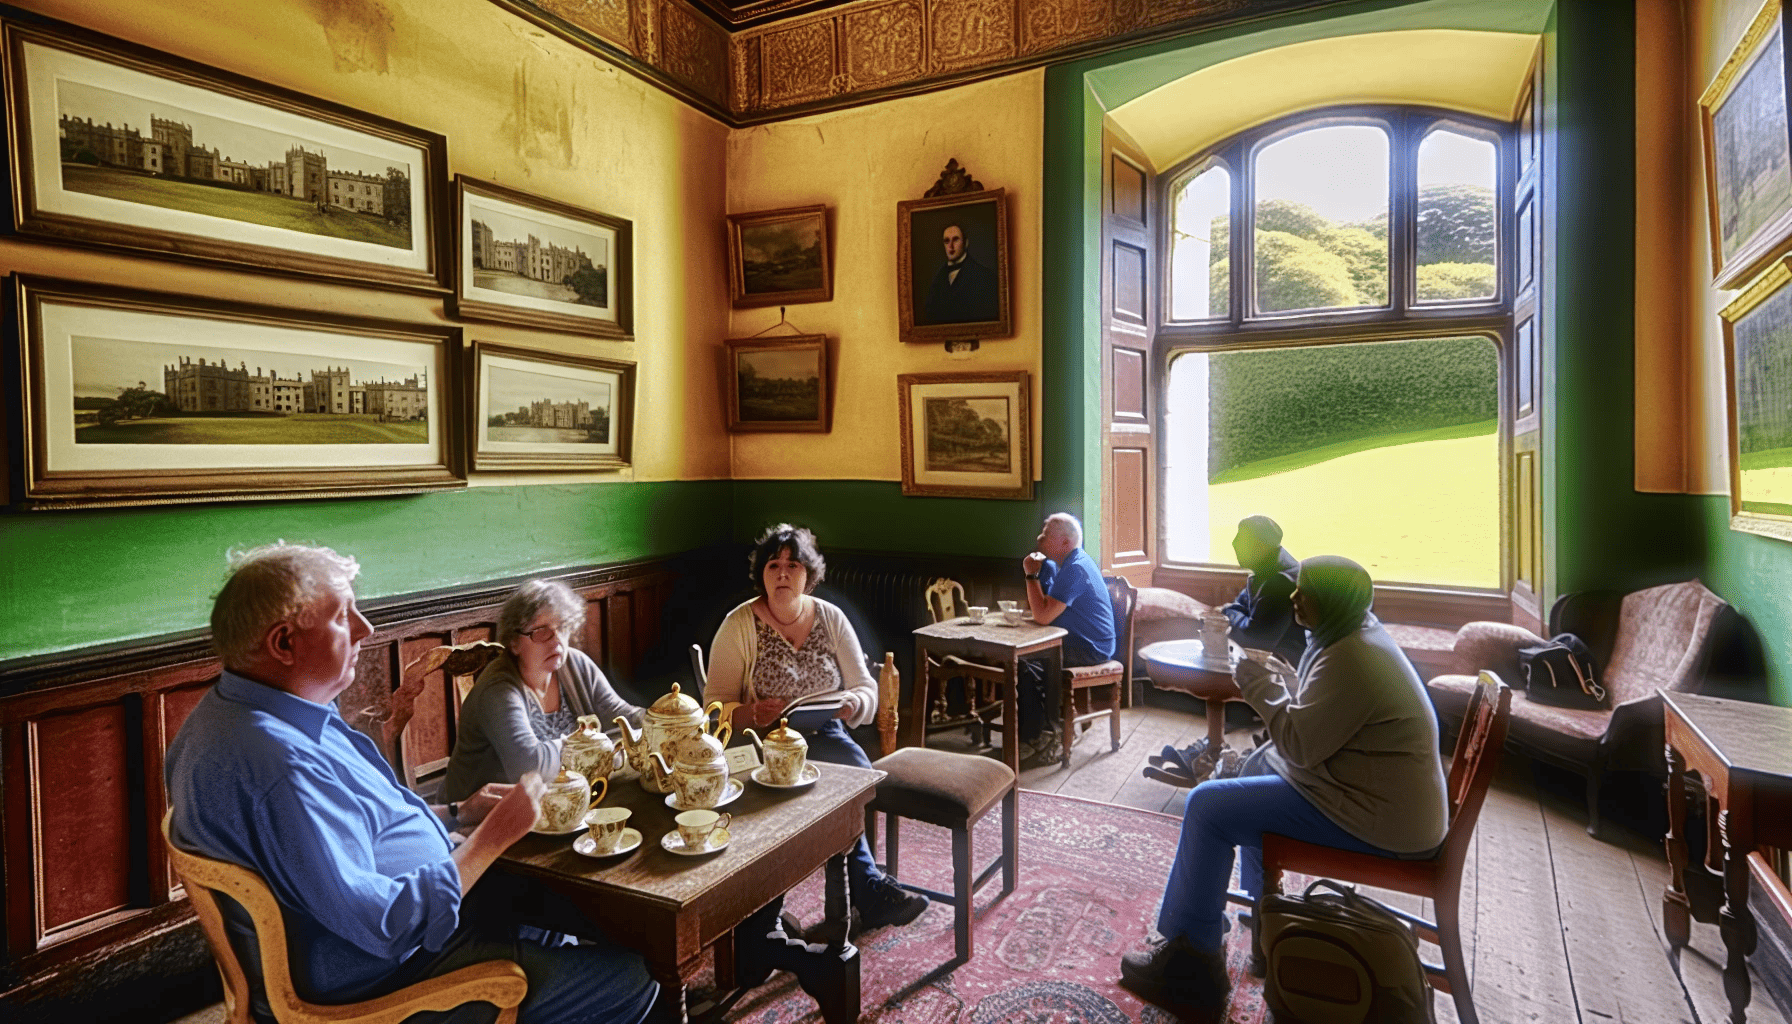 Charming Tea Room at Glenarm Castle with a view of the gardens